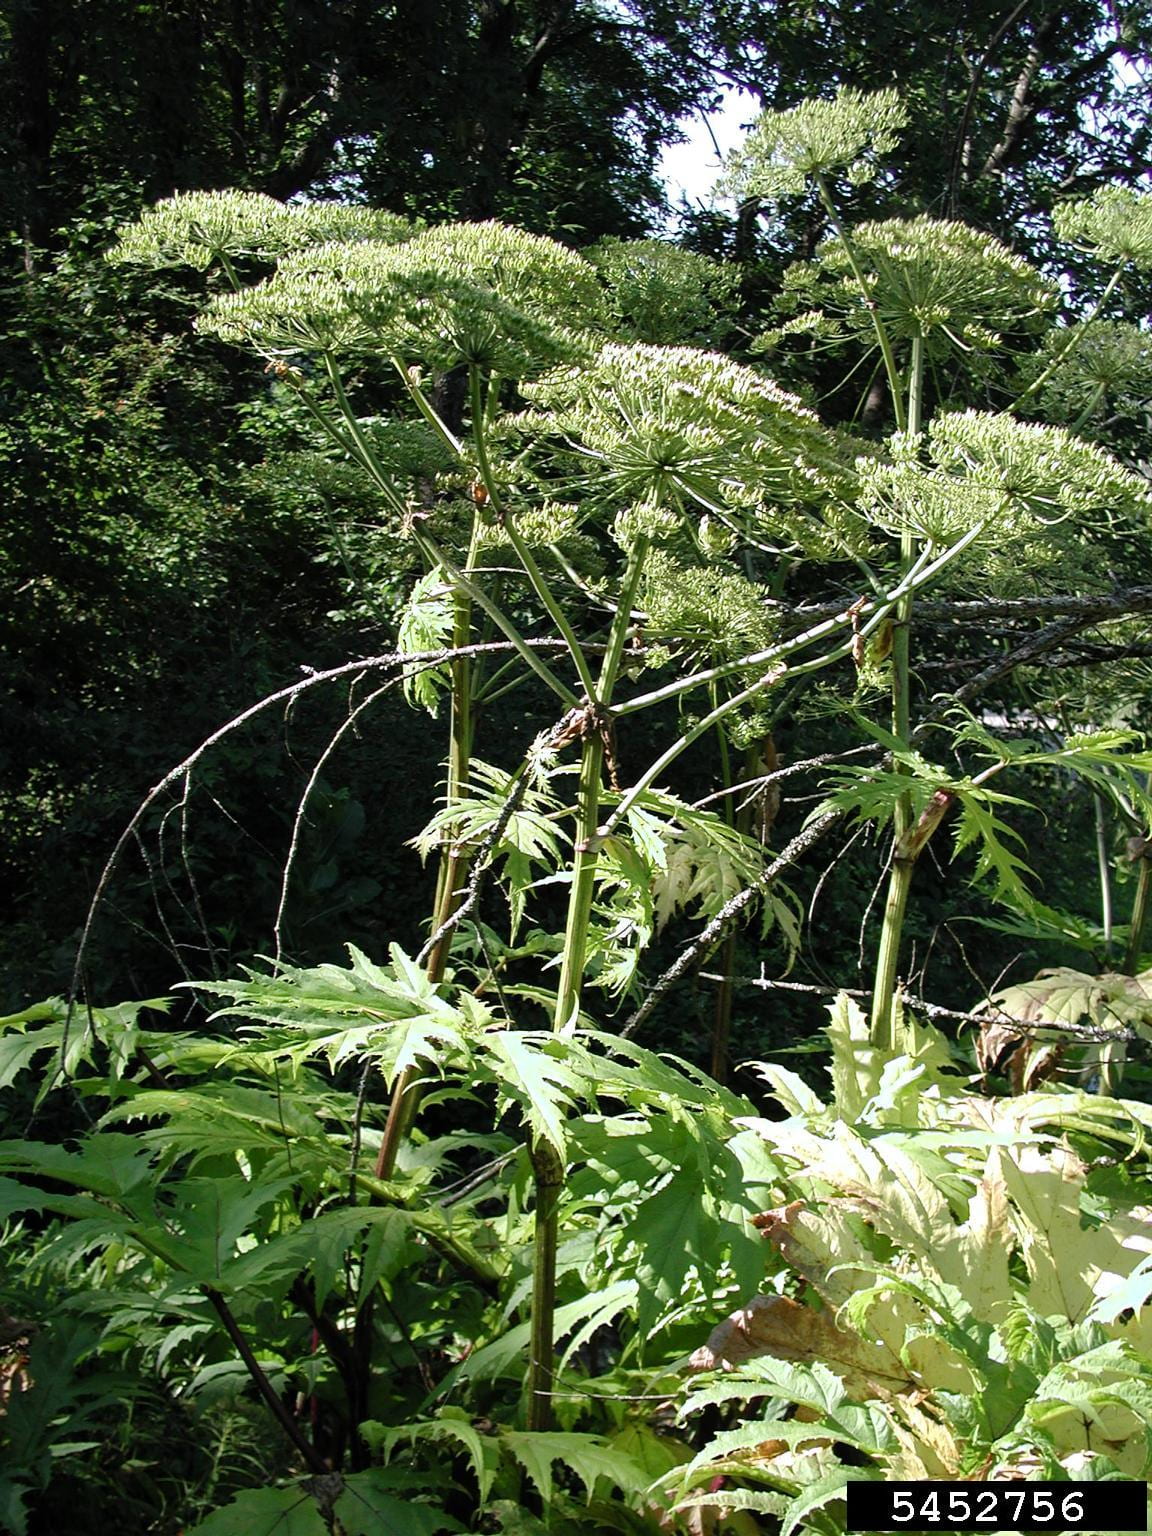 Giant hogweed plant. Photo by Leslie J. Mehrhoff, of the University of Connecticut, via Bugwood.org.